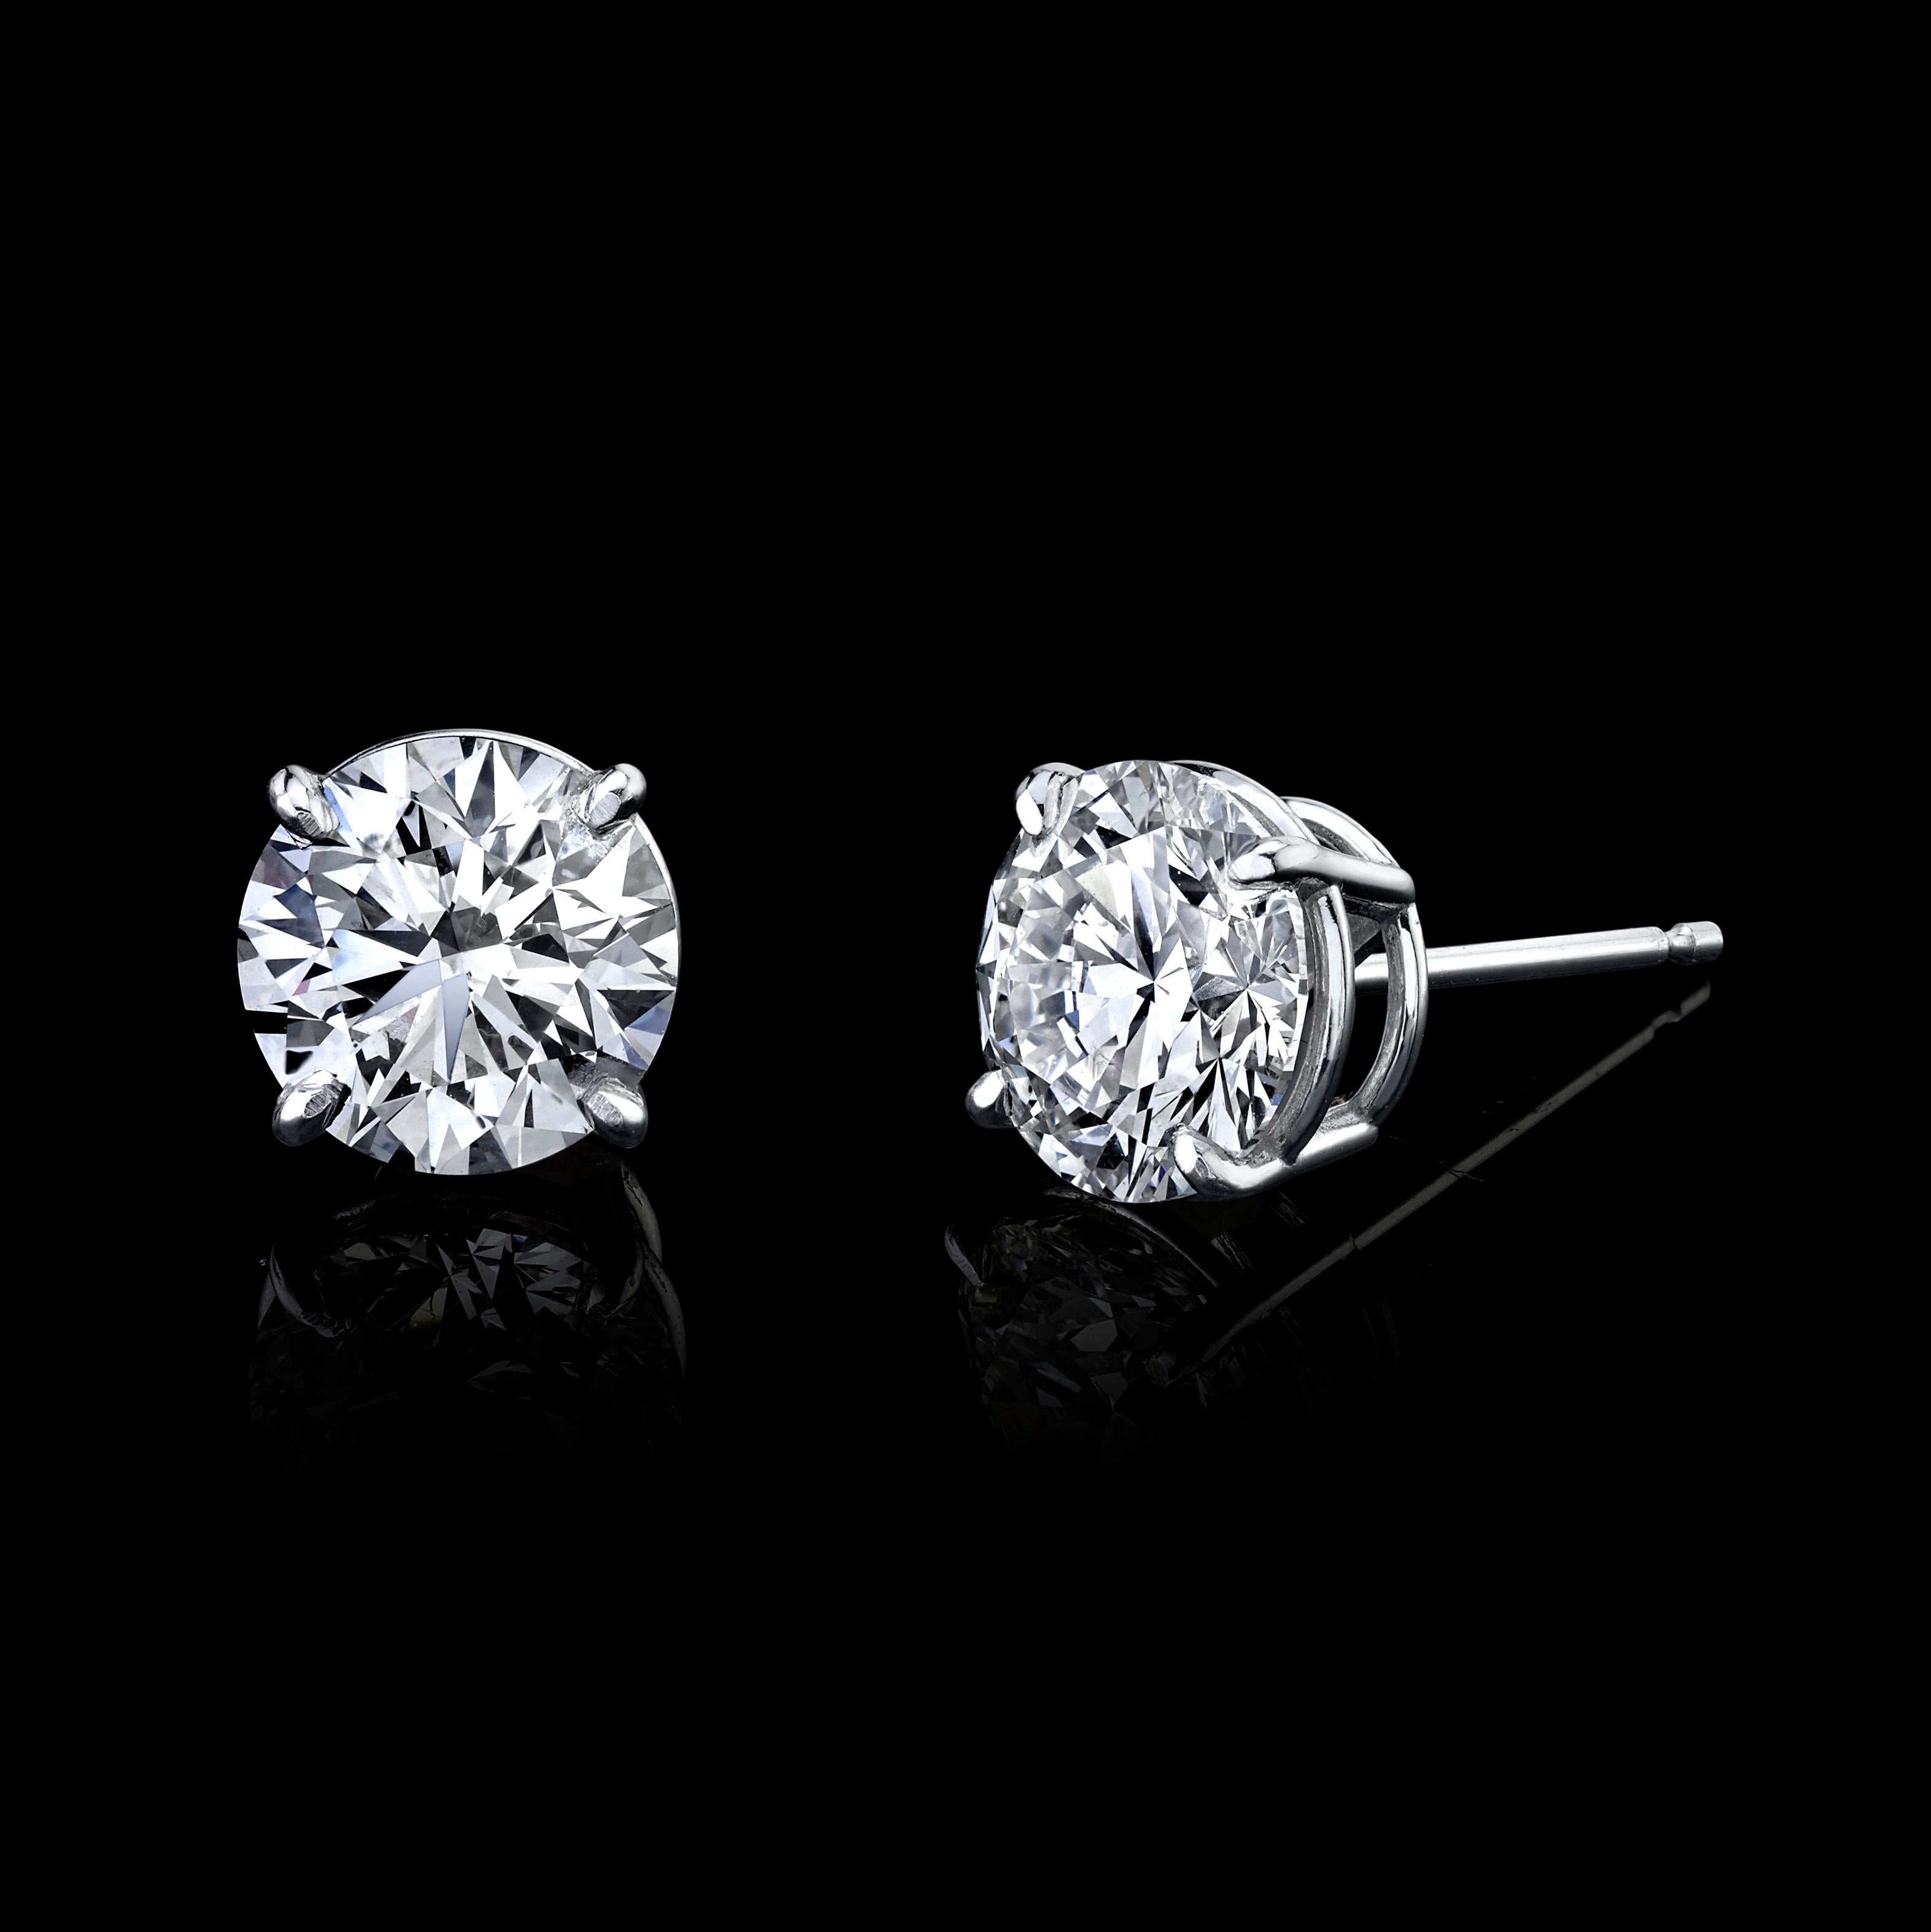 Round Cut Diamond Stud Earrings 3.53 Carat with GIA Certificates Platinum 4-Prong